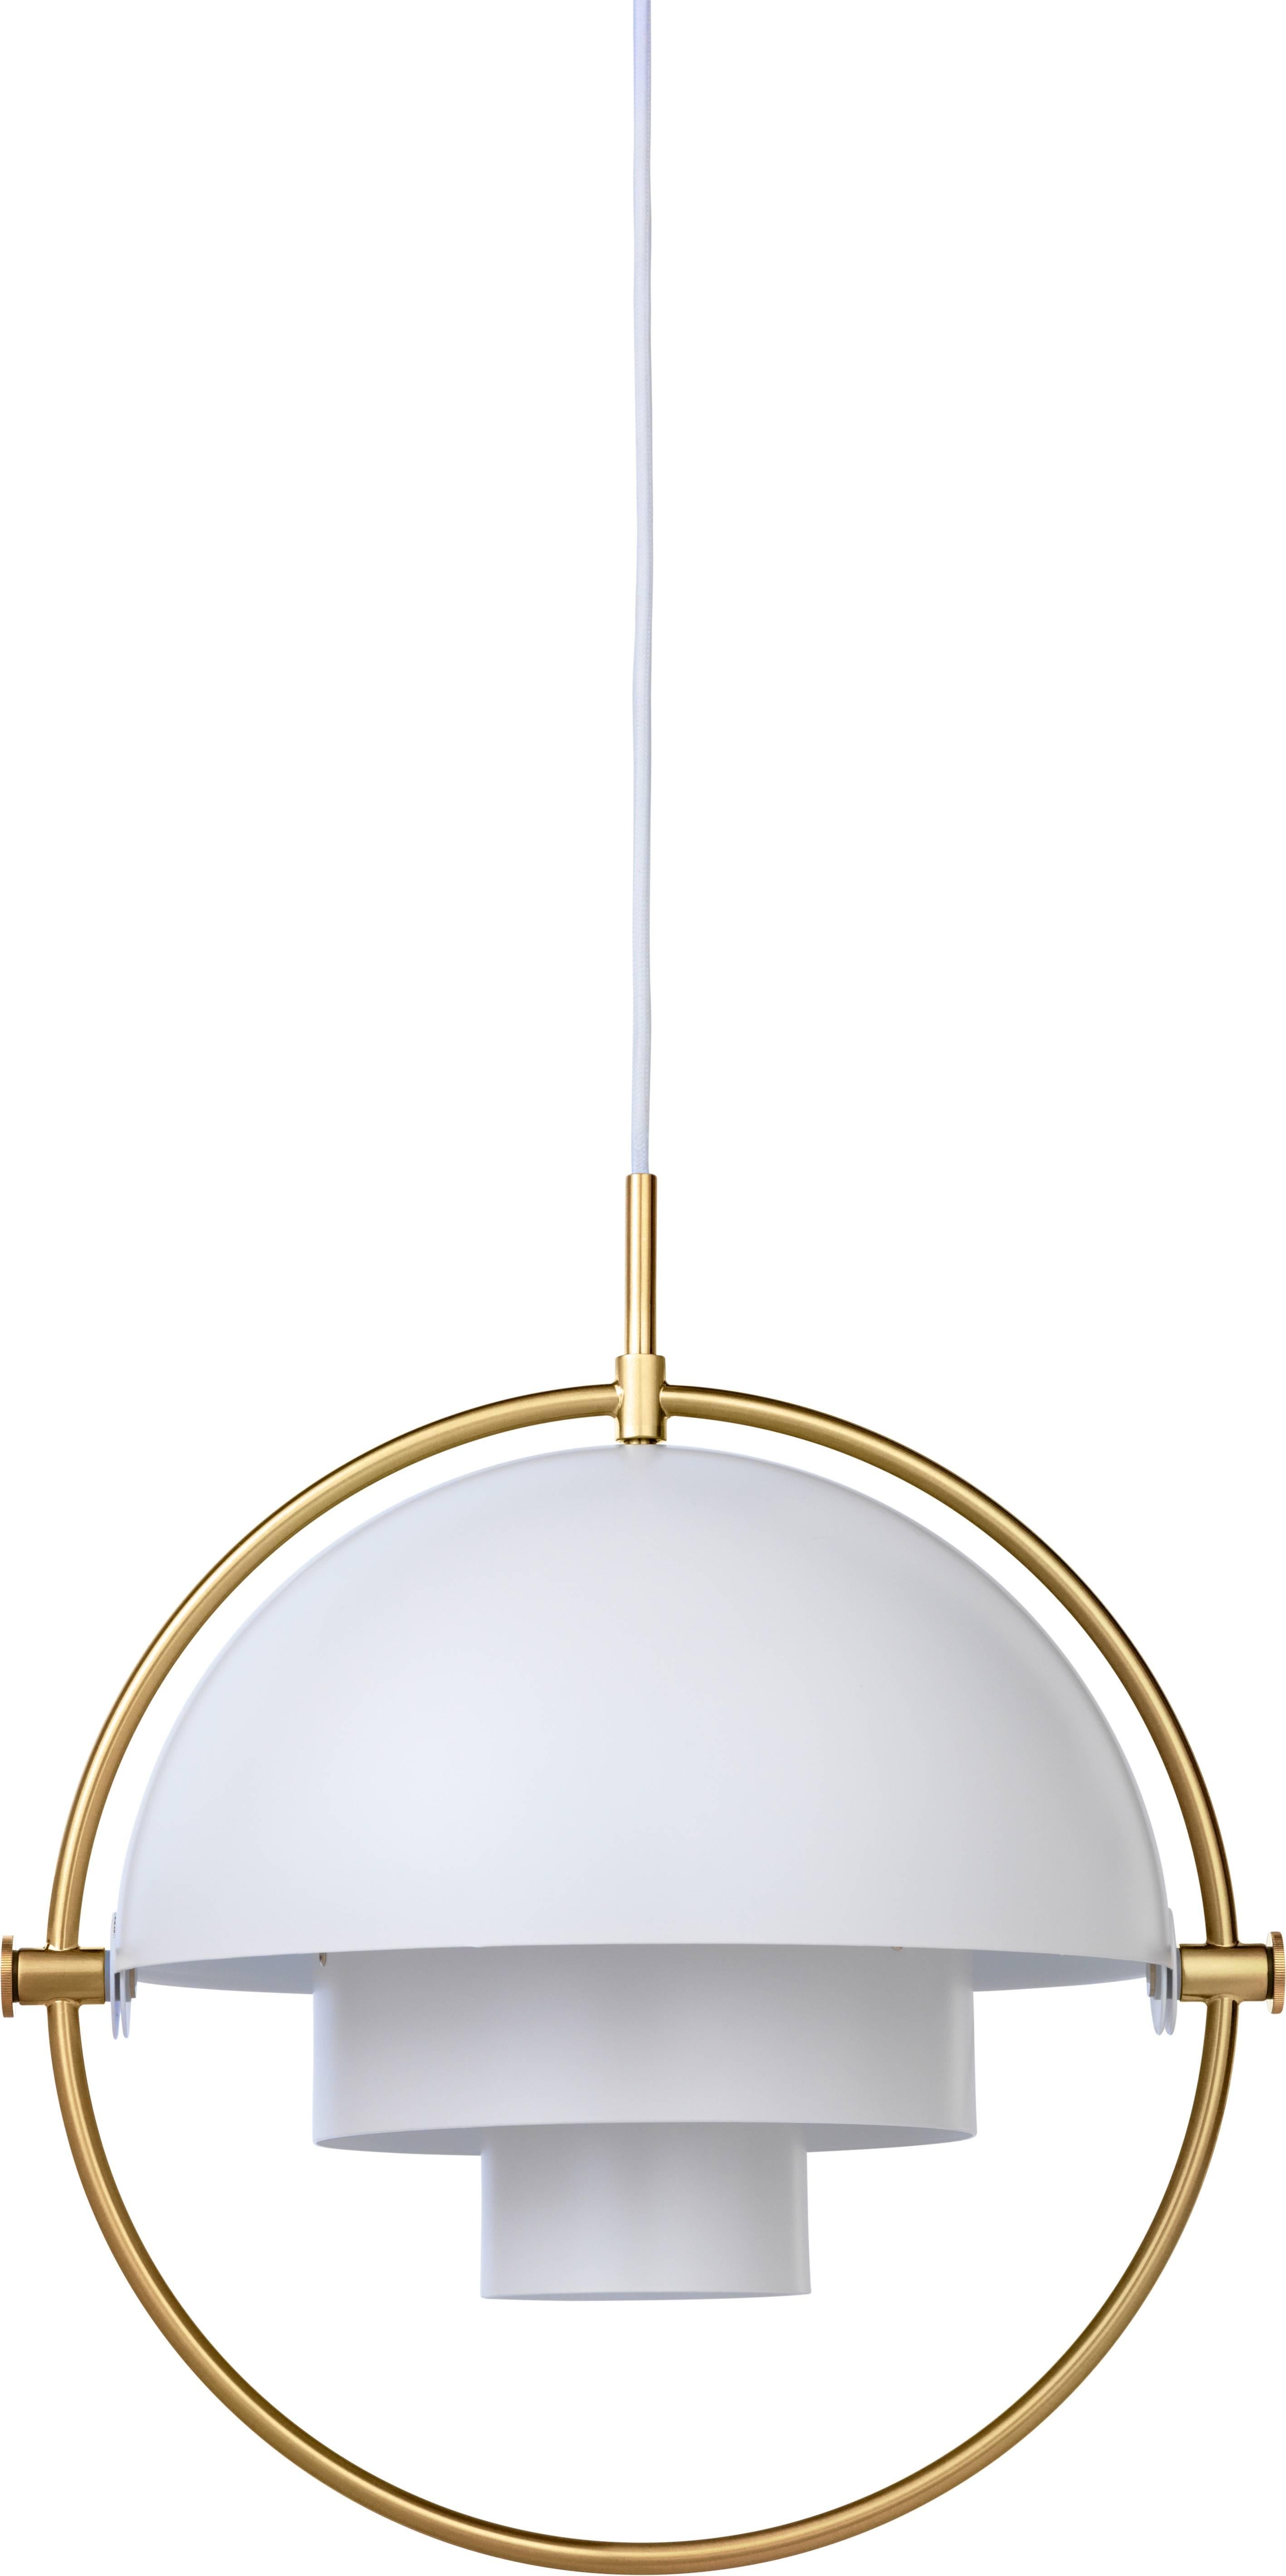 Brass Multi-Light pendant, Louis Weisdorf

Dimensions: 36 x 36 x 36 cm
Material: Brass
Designer: Louis Weisdorf
Produced by Gubi in Denmark

The Multi-Lite Pendant embraces the golden era of Danish design with its characteristic shape of two